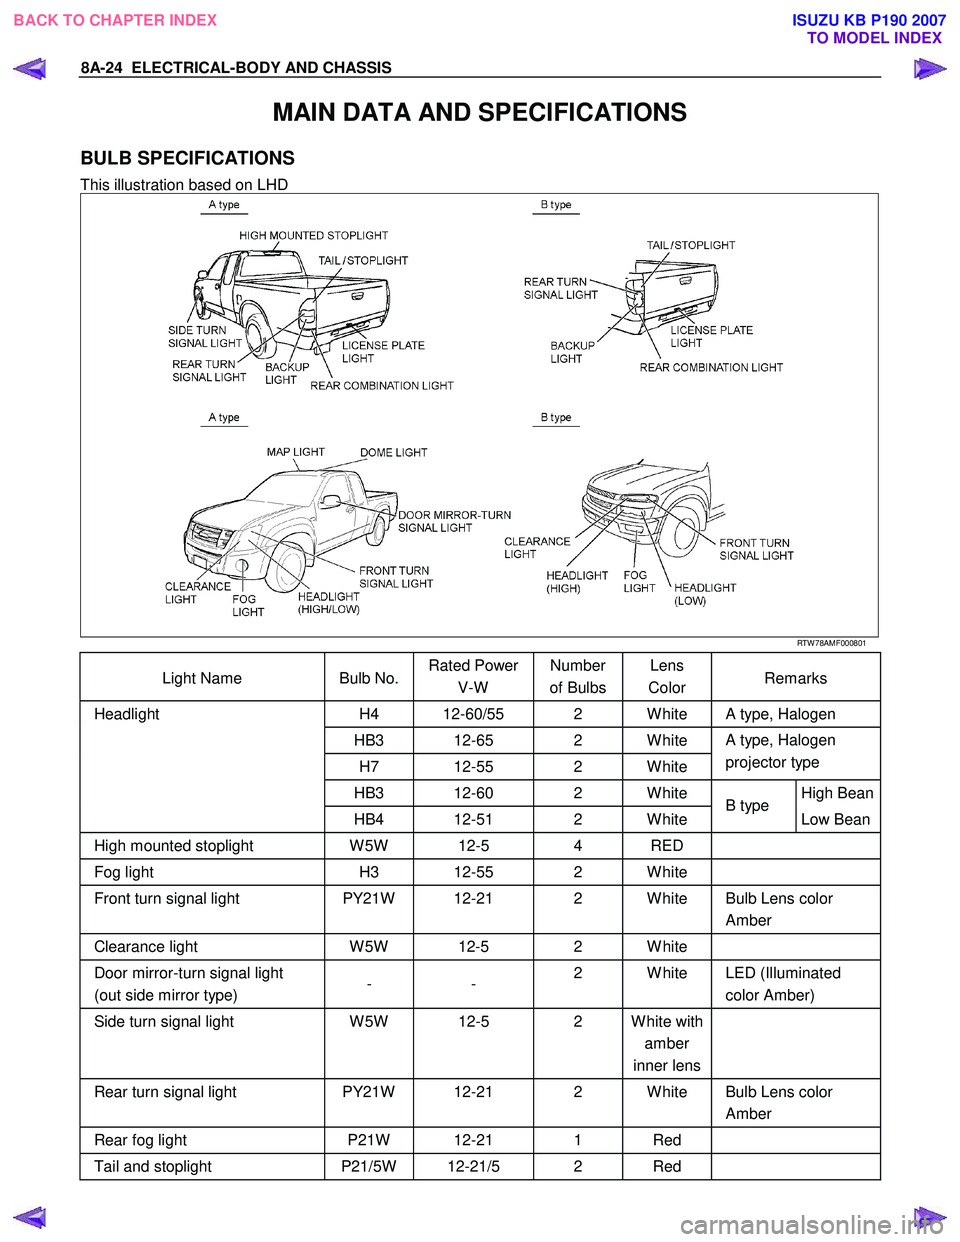 ISUZU KB P190 2007  Workshop Owners Manual 8A-24  ELECTRICAL-BODY AND CHASSIS 
MAIN DATA AND SPECIFICATIONS 
BULB SPECIFICATIONS 
This illustration based on LHD  
  
   RTW 78AMF000801 
Light Name   Bulb No. Rated Power 
V-W   Number 
of Bulbs